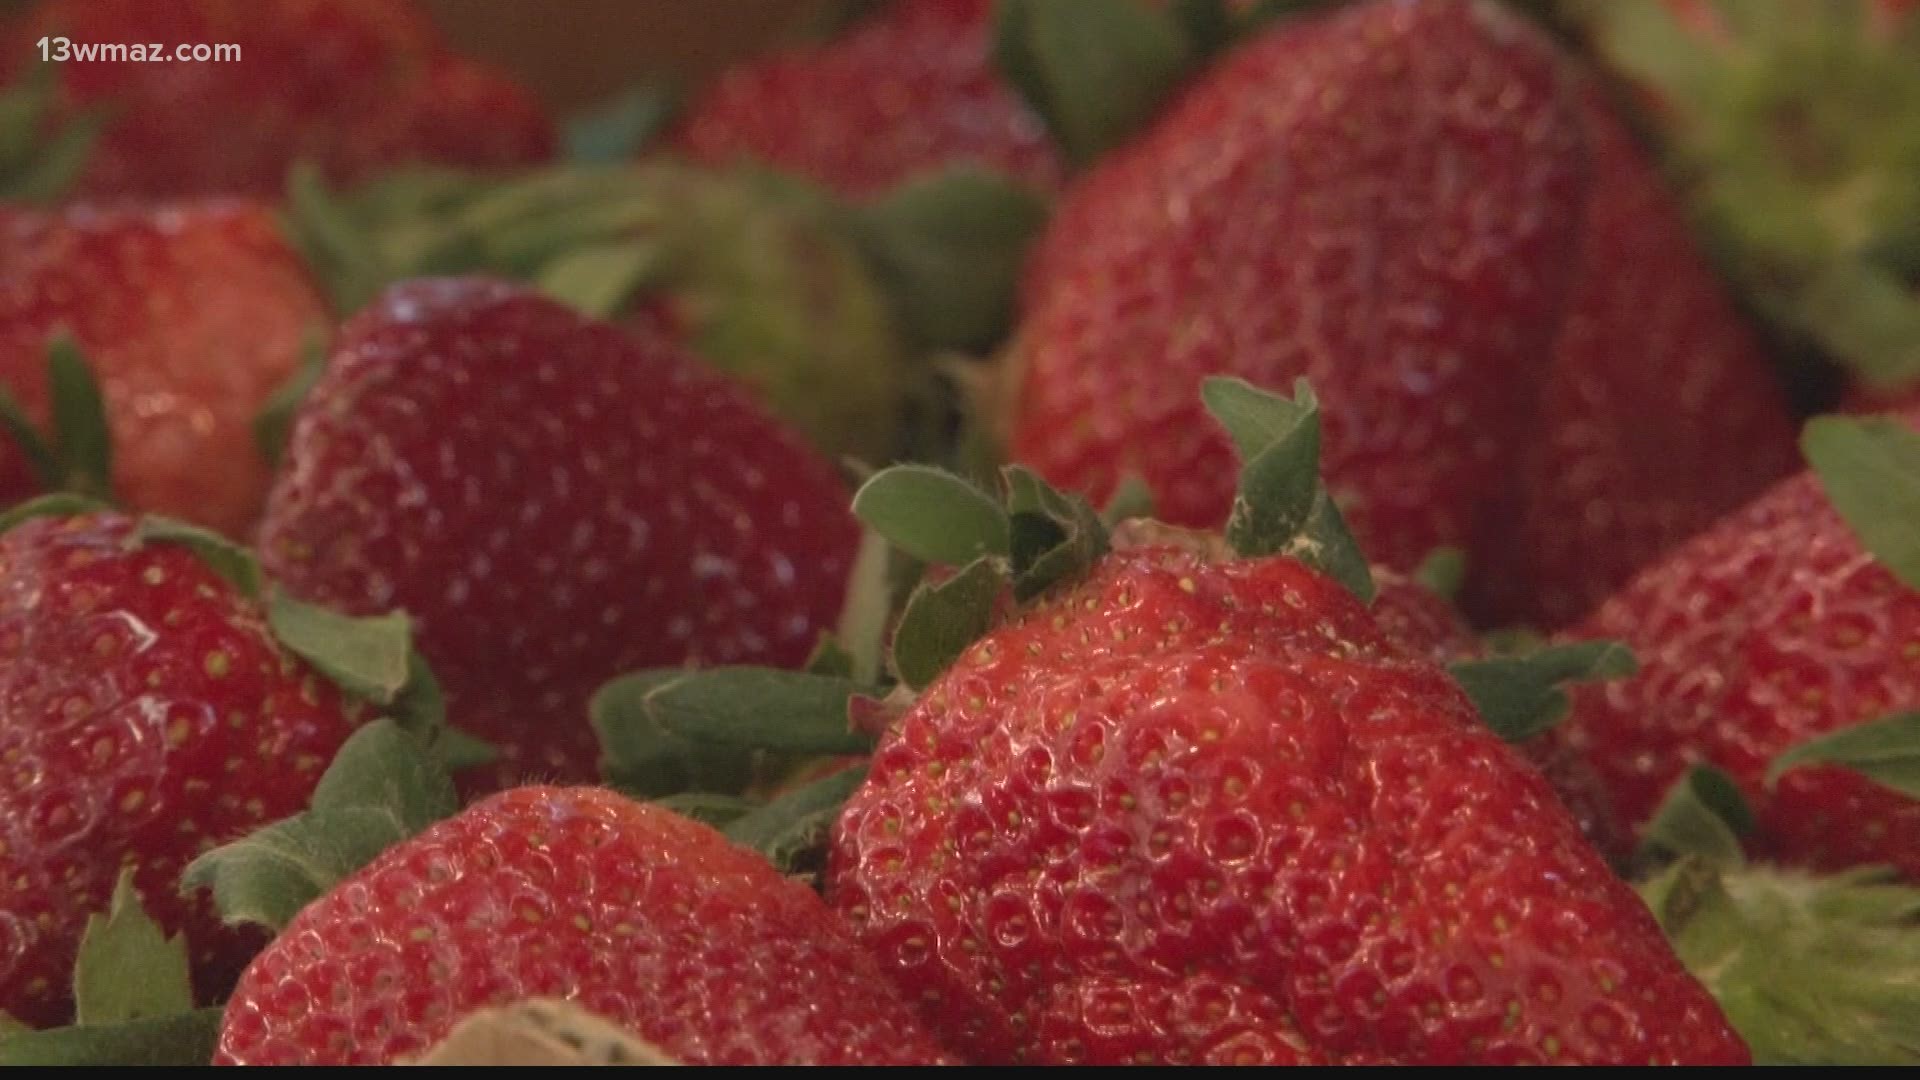 Fruit and frost don't mix well, so the people at Dickey Farms are prepping for what might be a cold night